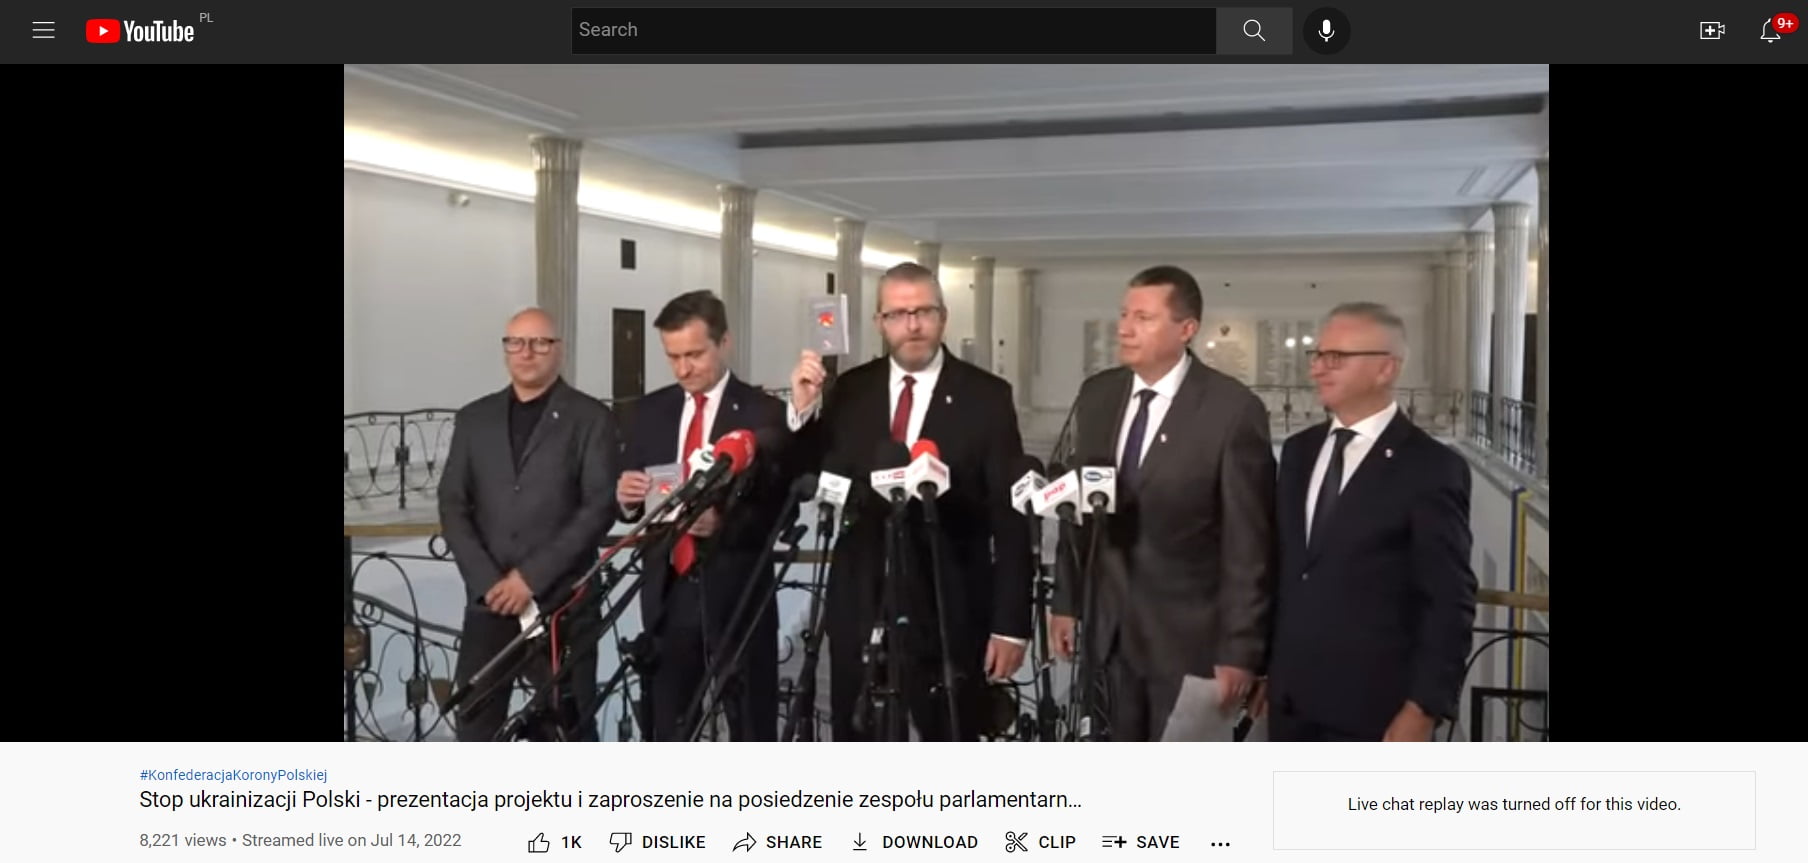 Press conference of the Confederation of the Crown of Poland, in which details of the "Stop Ukrainianization of Poland" project are discussed, Source: YouTube